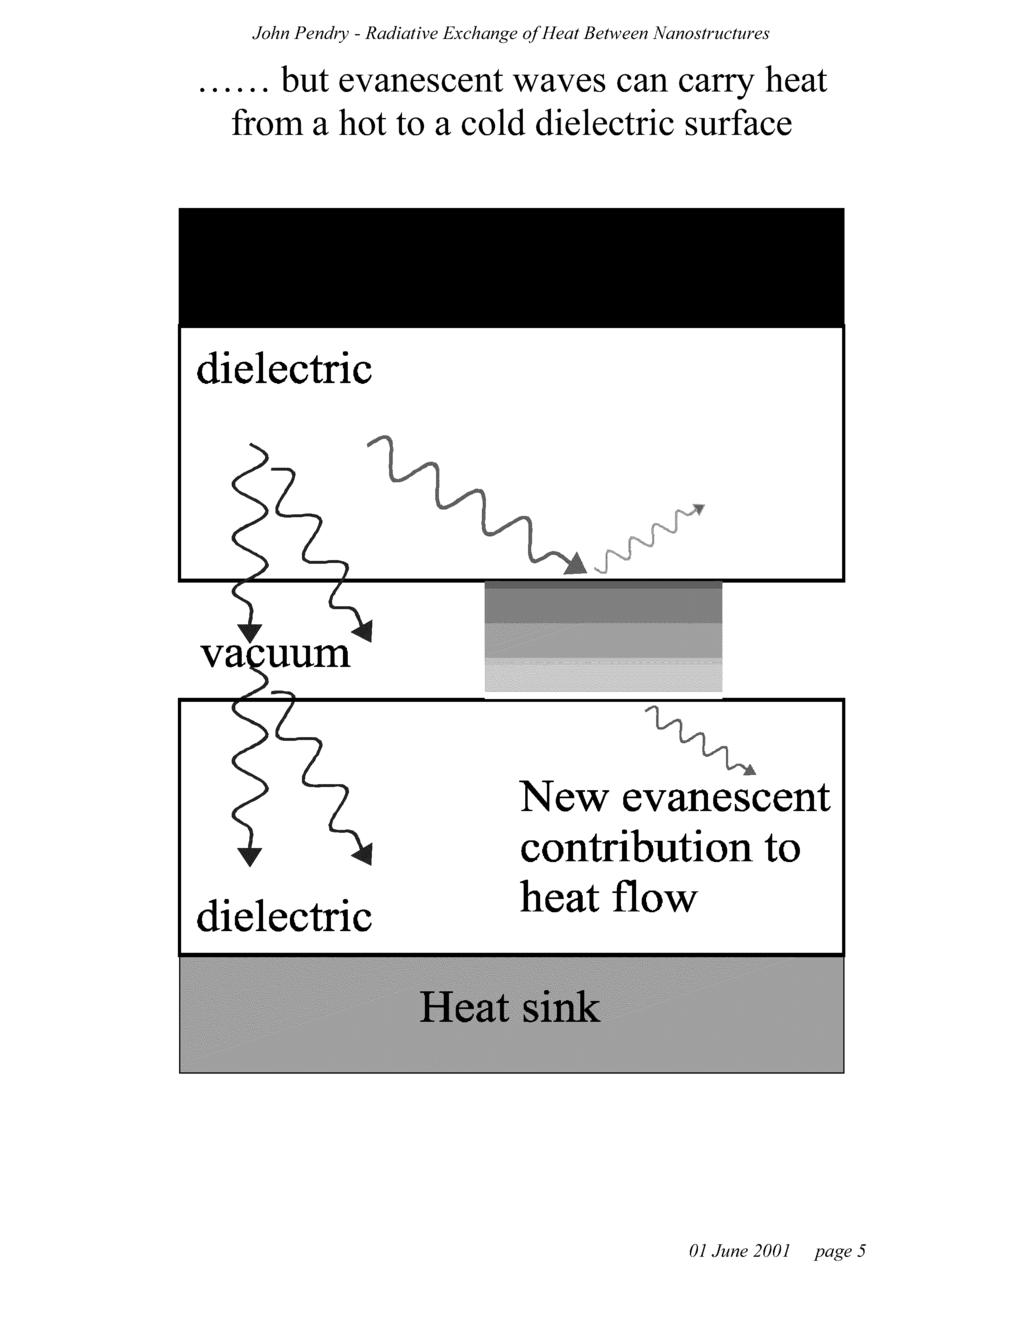 ... but evanescent waves can carry heat from a hot to a cold dielectric surface